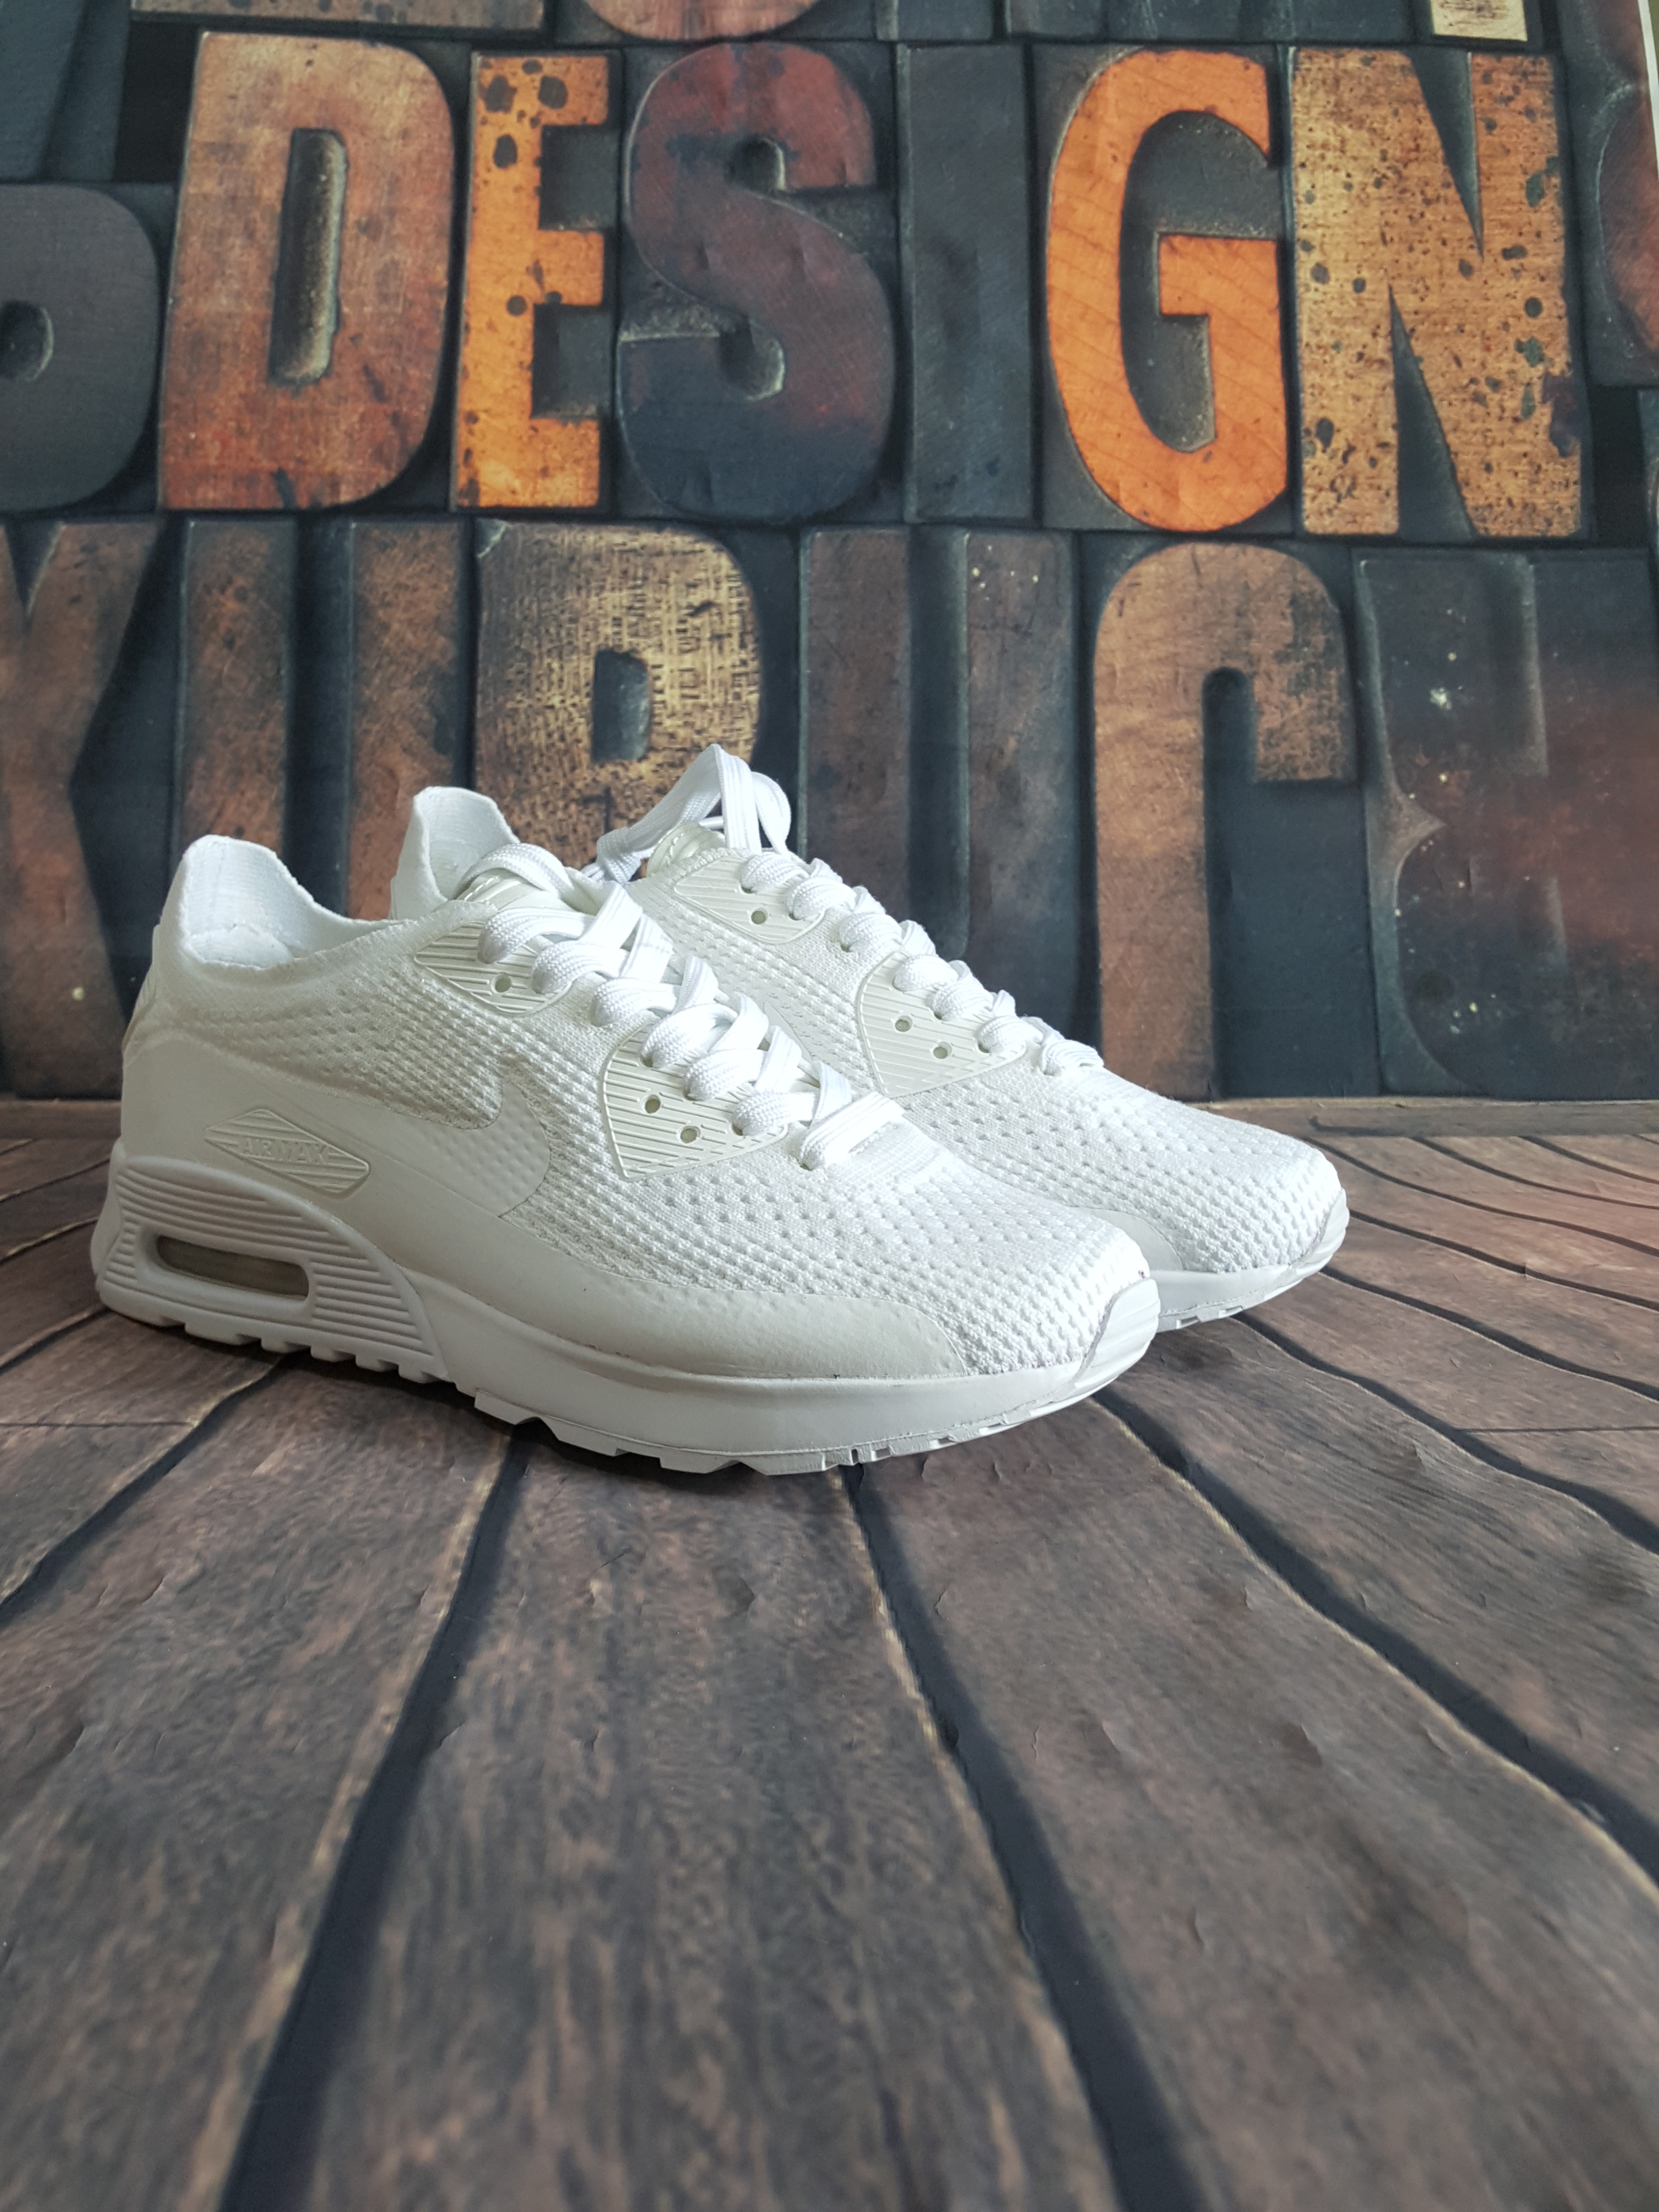 Nike Air Max 90 Flyknit All White Shoes